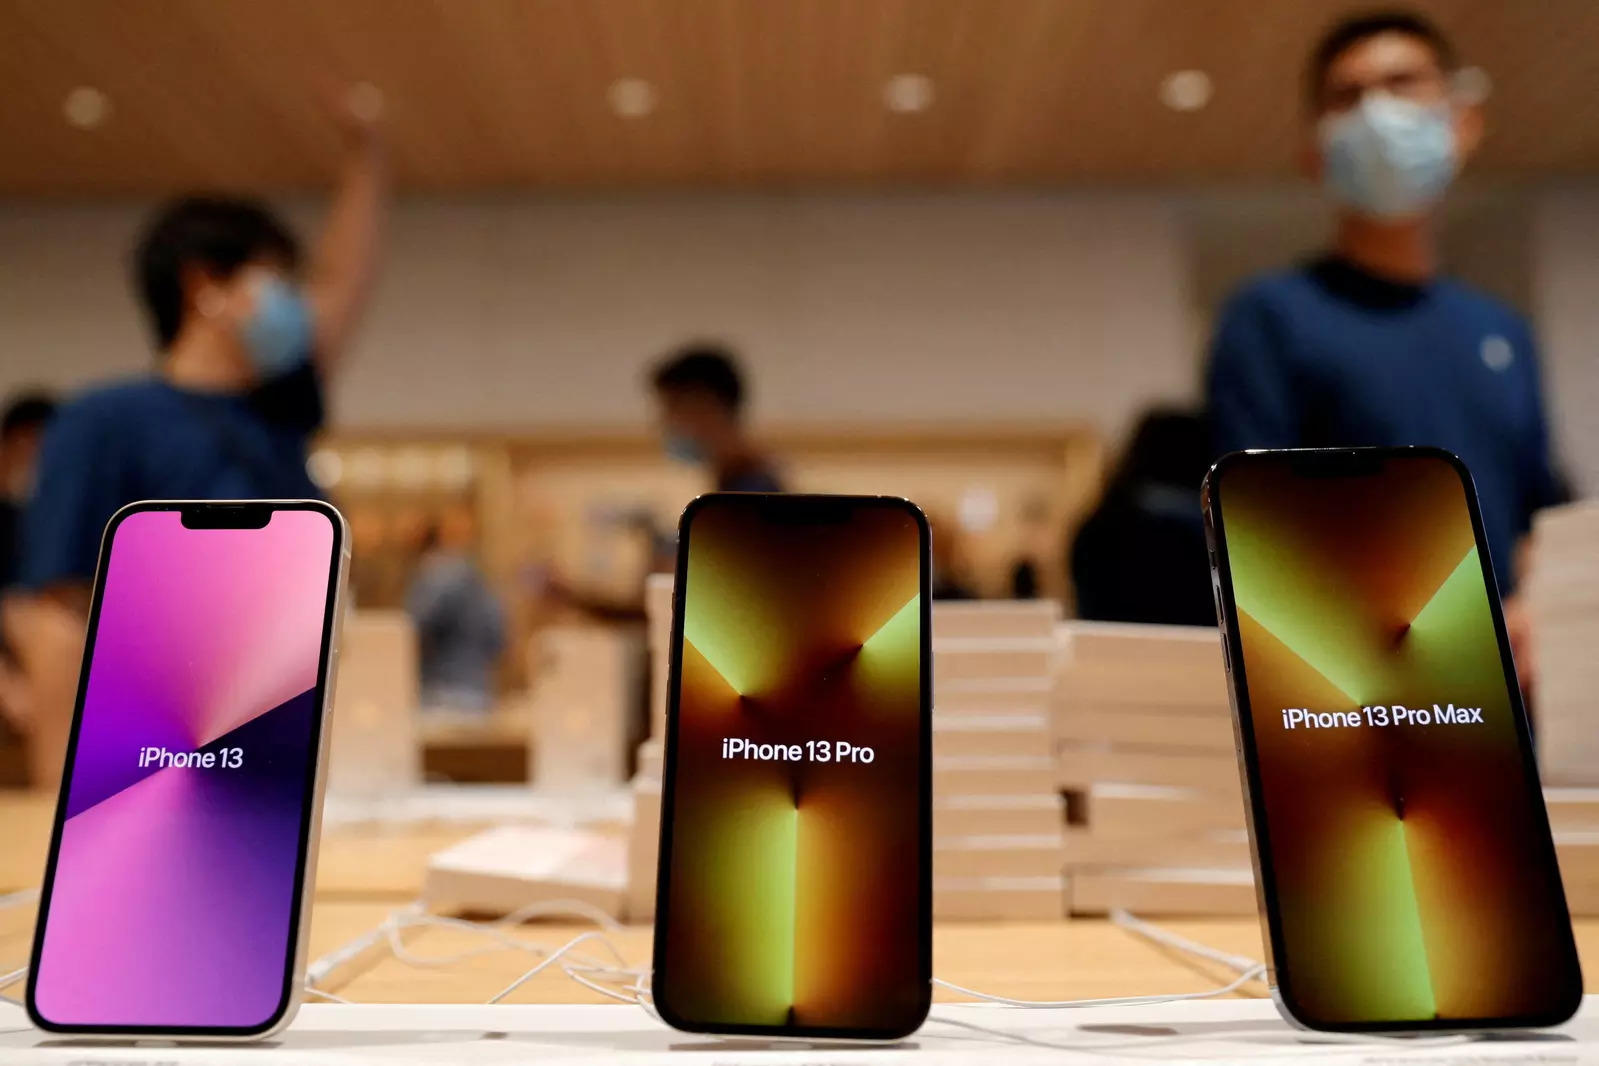  FILE PHOTO: Apple's iPhone 13 models are pictured at an Apple Store in Beijing, China September 24, 2021. REUTERS/Carlos Garcia Rawlins/File Photo